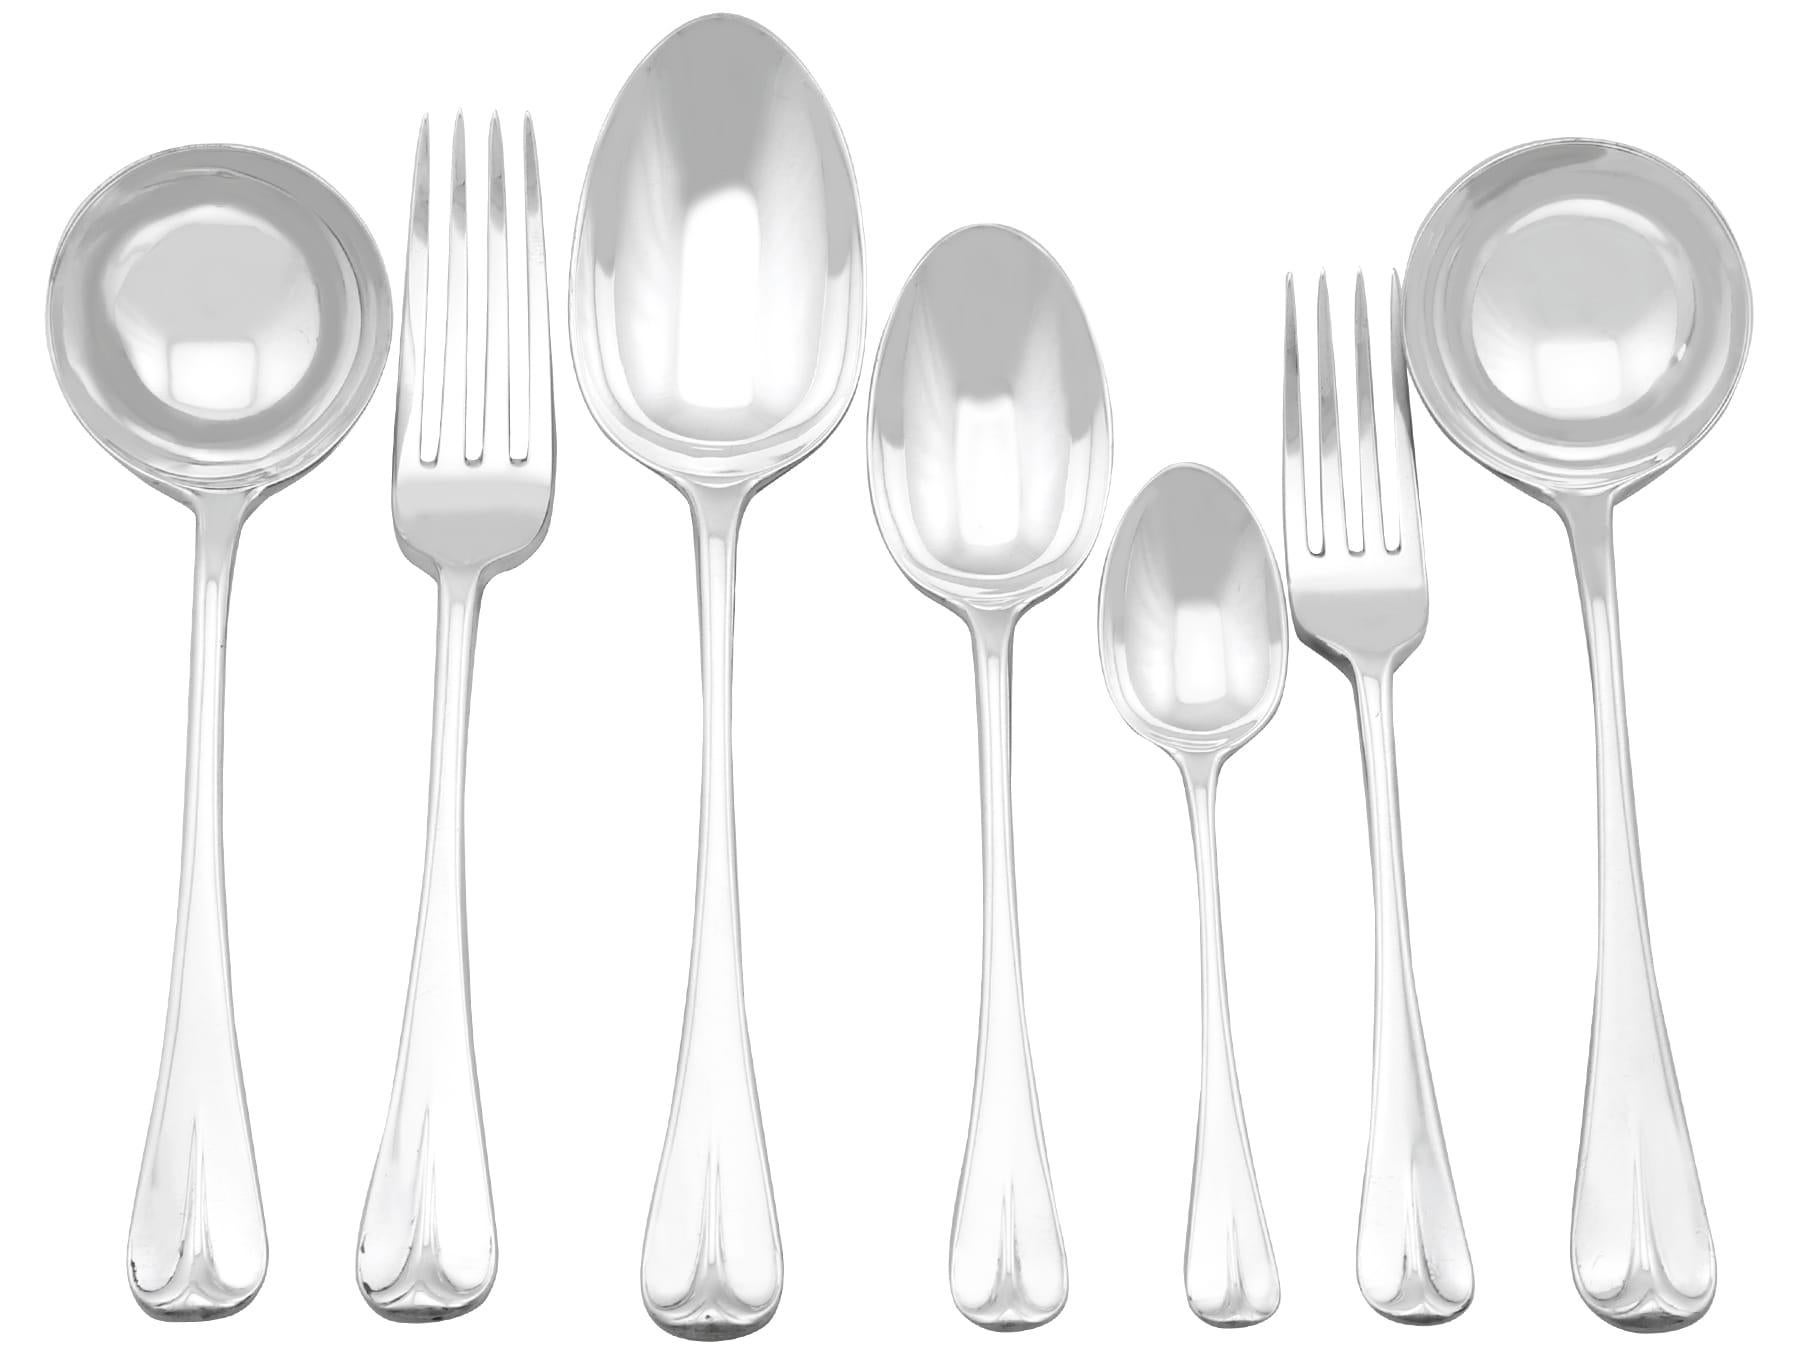 An exceptional, fine and impressive antique Edwardian English sterling silver straight Hanoverian Drop pattern flatware service; an addition to our flatware collection

The pieces of this exceptional, antique Victorian straight* sterling silver